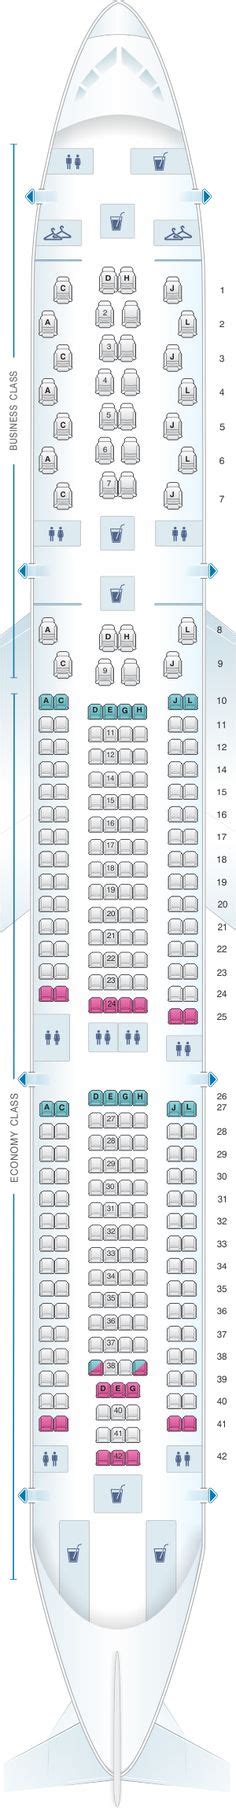 26 Iberia A330 Seat Map Maps Database Source